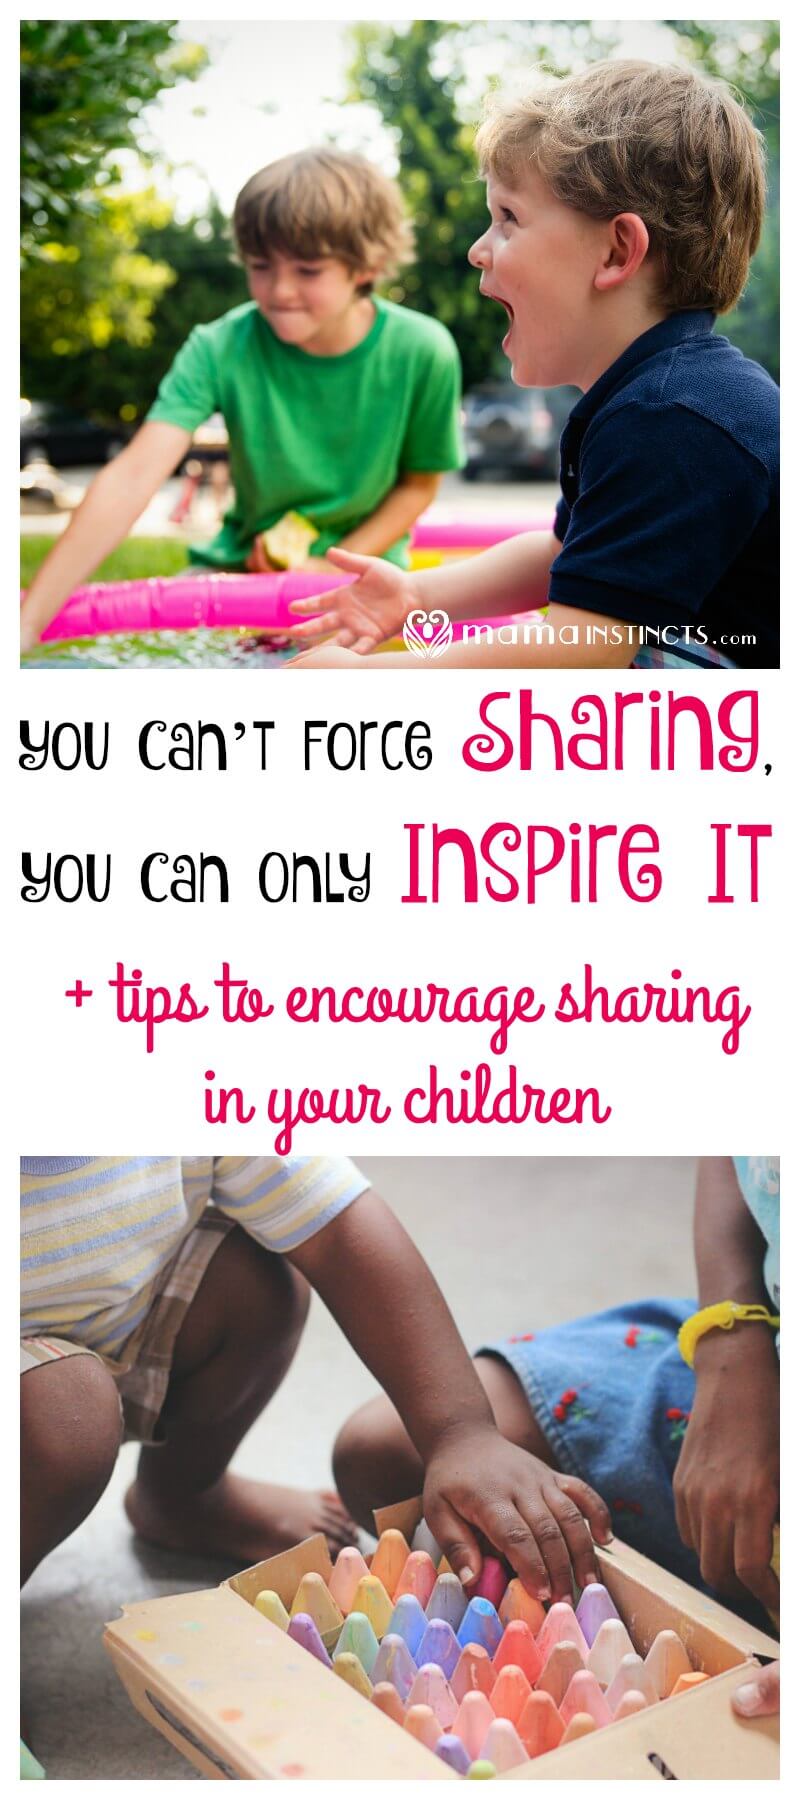 What do you do when all of a sudden 2 kids want the same toy? Forcing them to share is not the answer. Find out why and how to inspire sharing in your child.